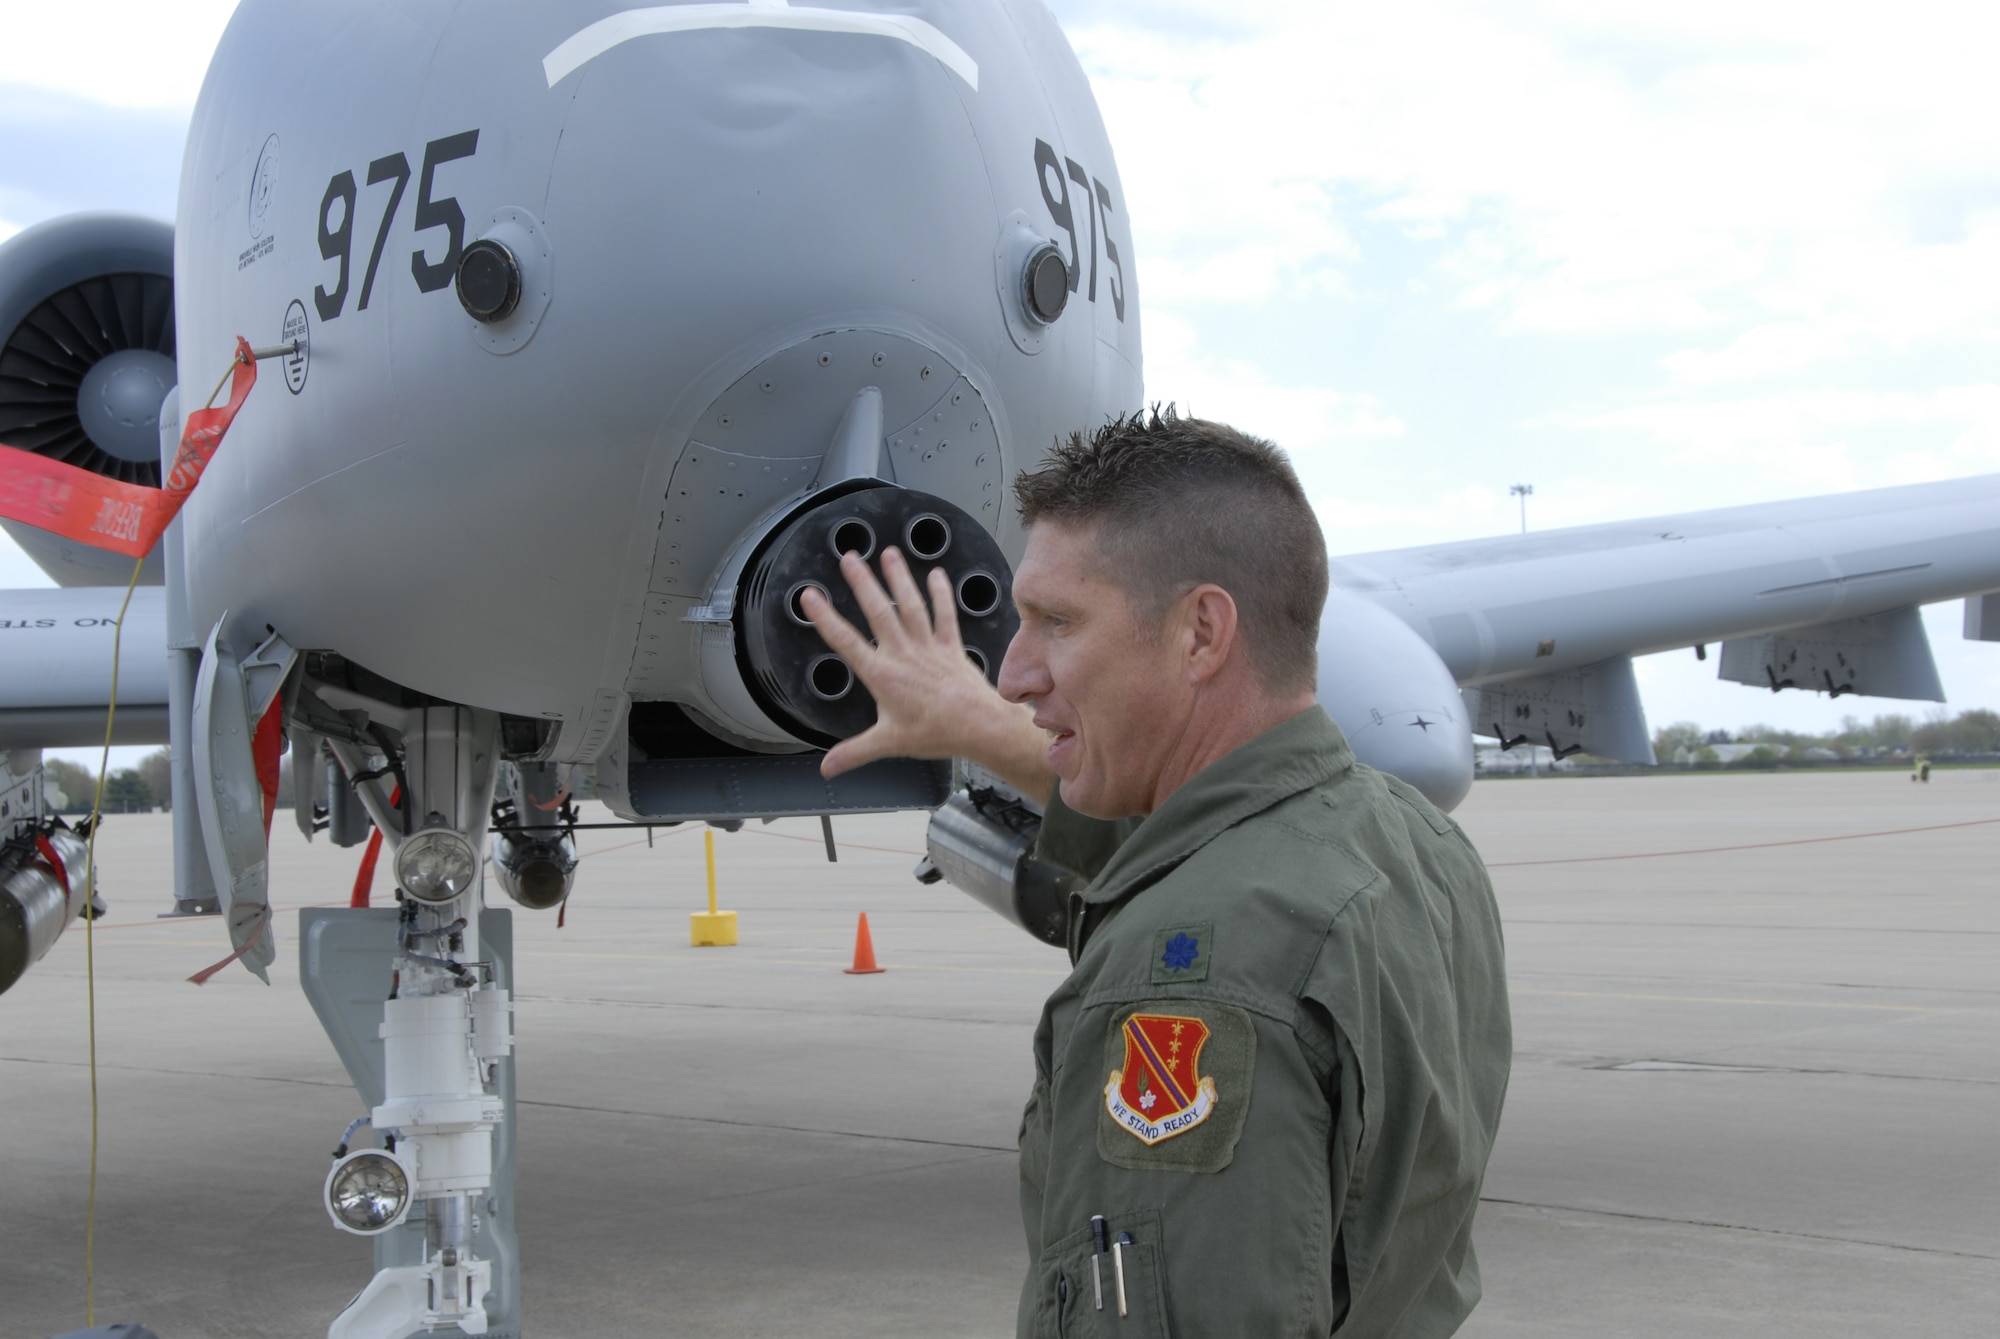 Lt. Col. Doug Champagne, commanding officer of the 107th Fighter Squadron, Selfridge Air National Guard Base, discusses the firepower that the A-10 Thunderbolt II aircraft can bring to the close air support mission. The 107th launched its ceremonial first flight in the A-10 on May 2, completing the conversion from flying F-16 Fighting Falcons. The 30 mm GAU-8/A seven-barrel Gatling gun is one of the A-10’s most noticeable features. (U.S. Air Force photo by Technical Sgt. David Kujawa) 